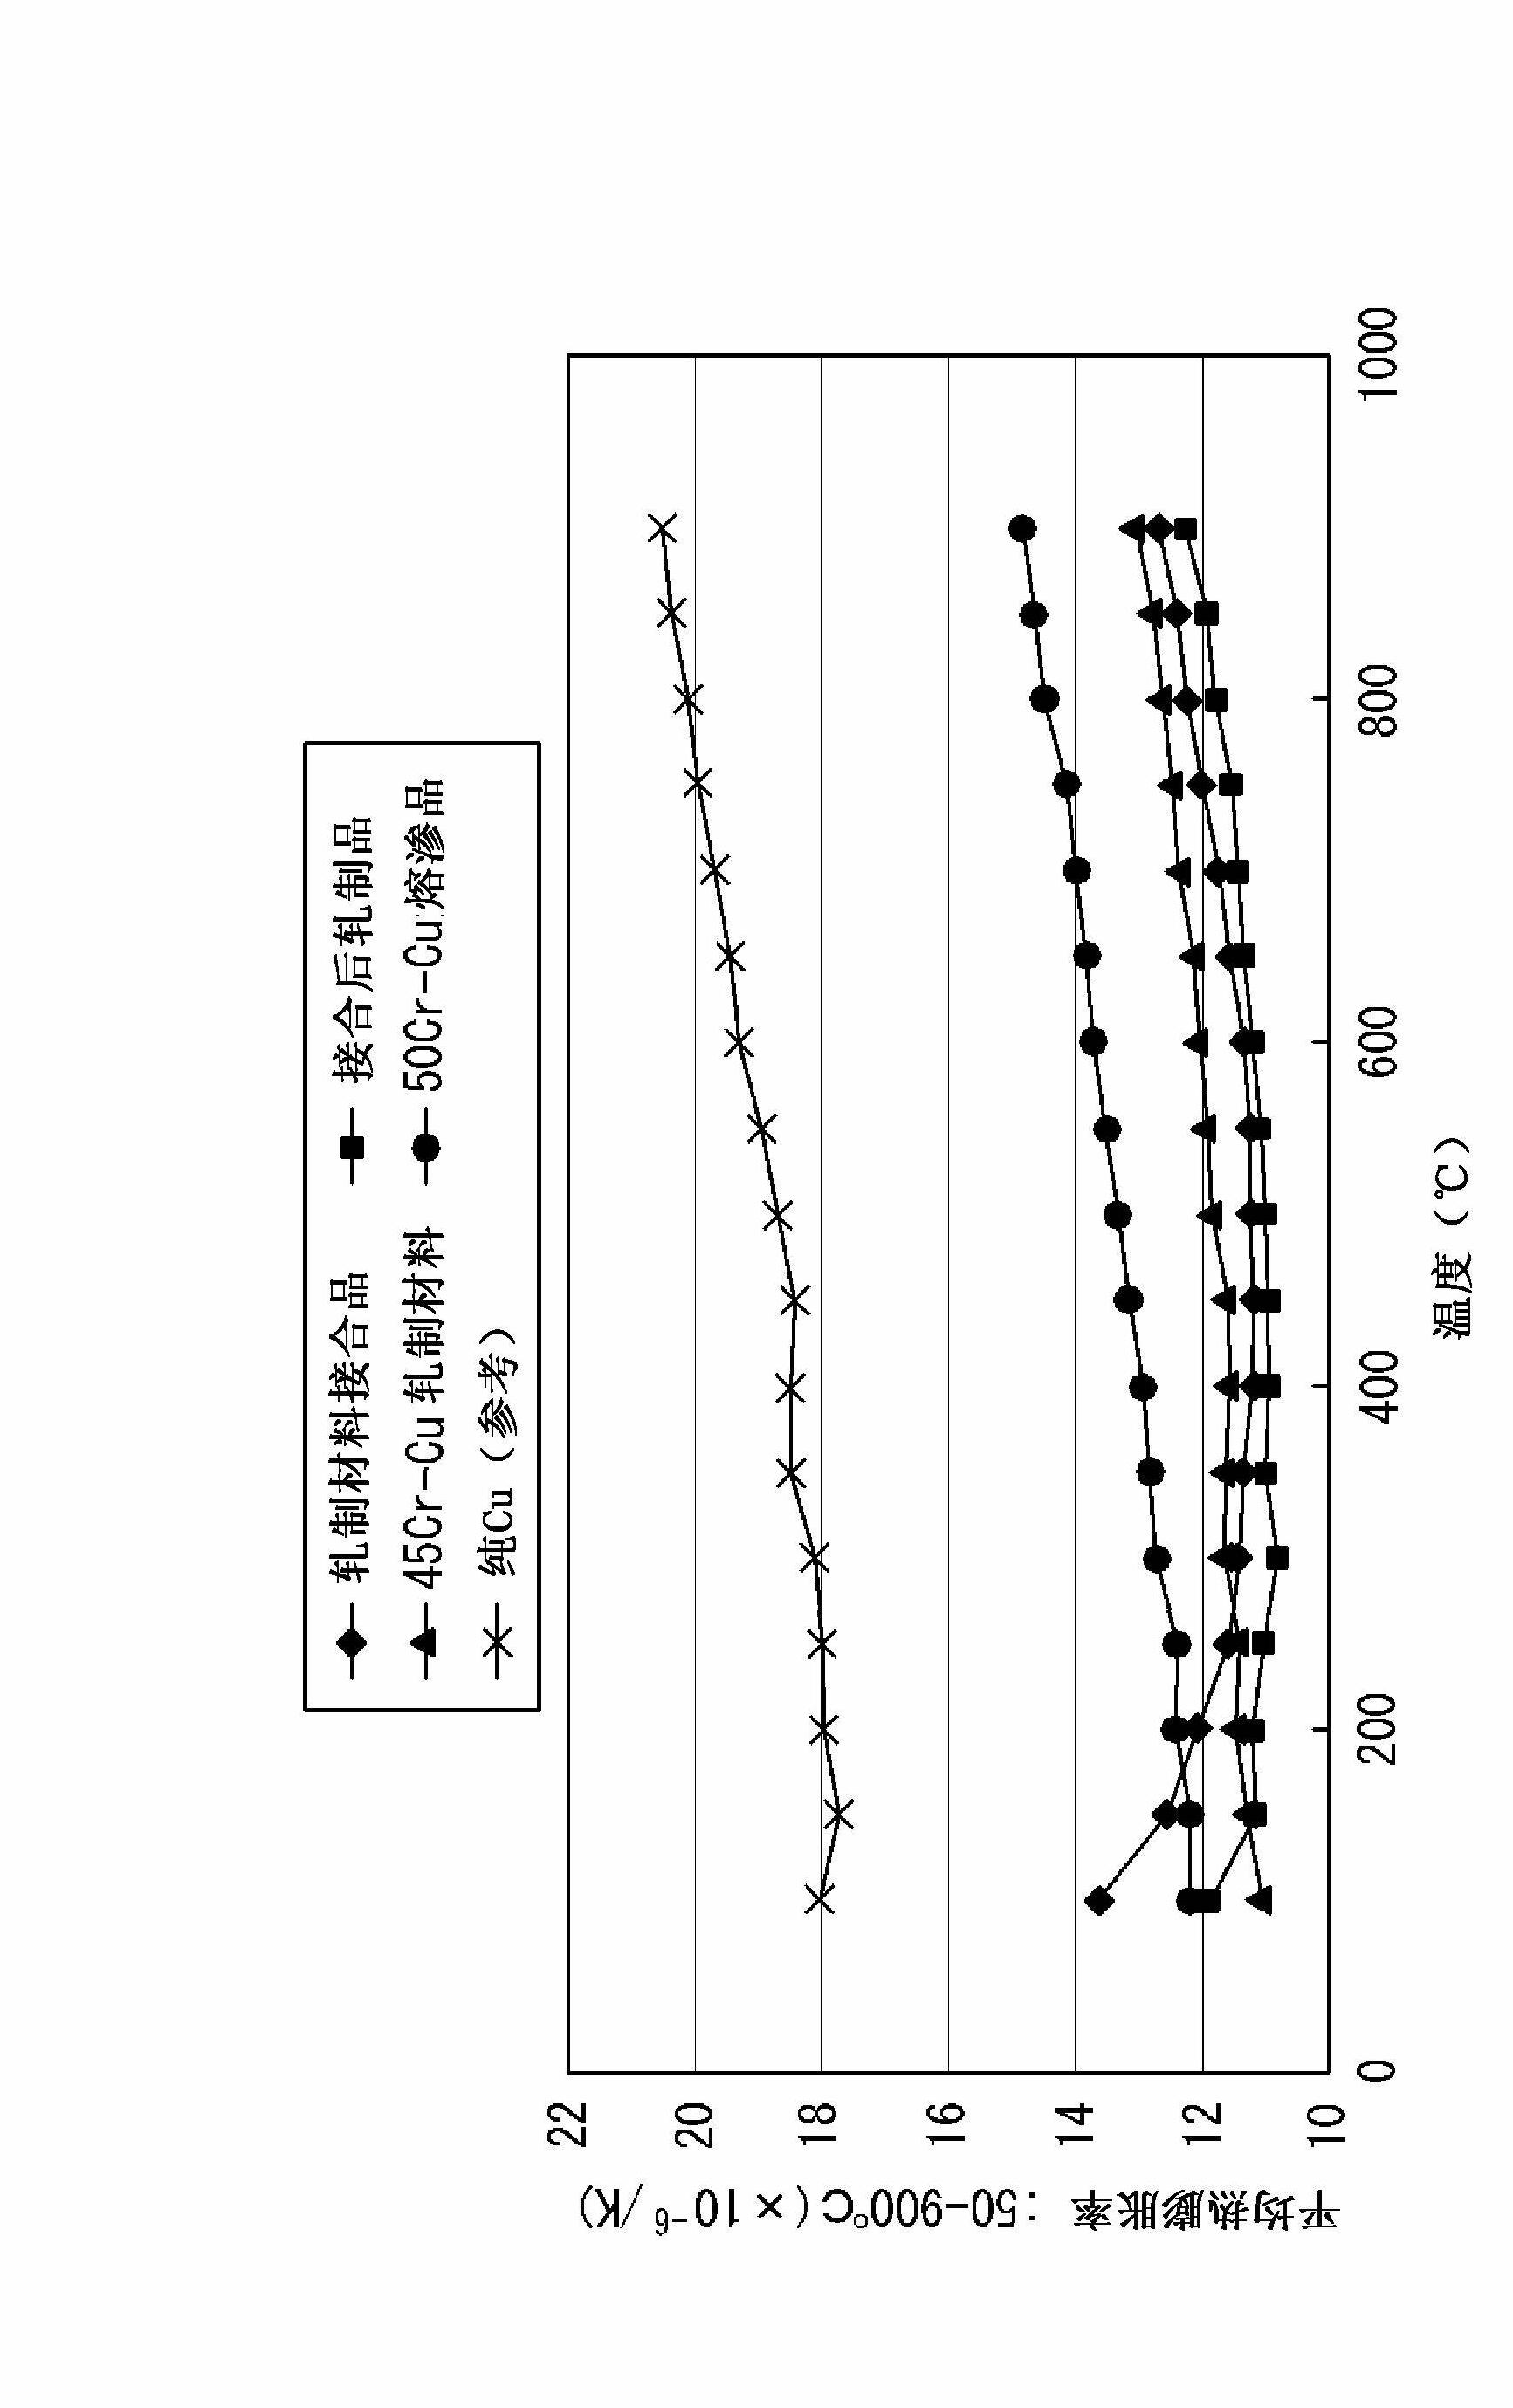 Heat sink for electronic device, and process for production thereof